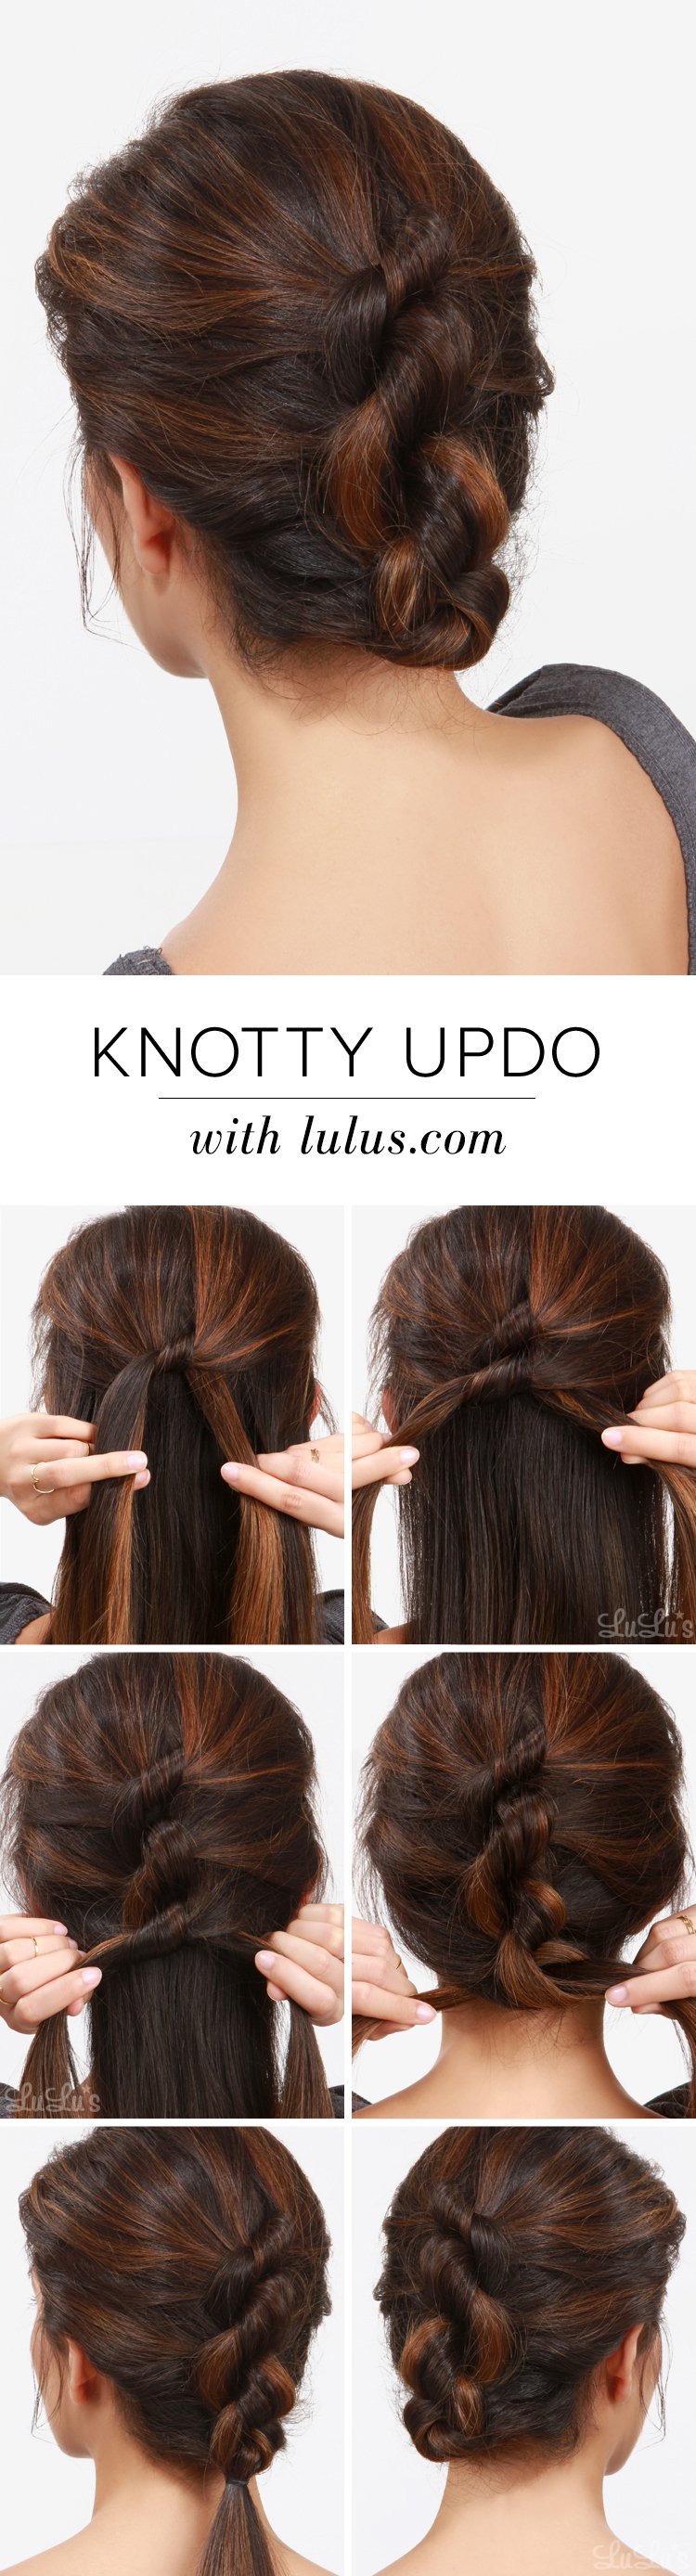 Easy Knotted Updo Hairstyle